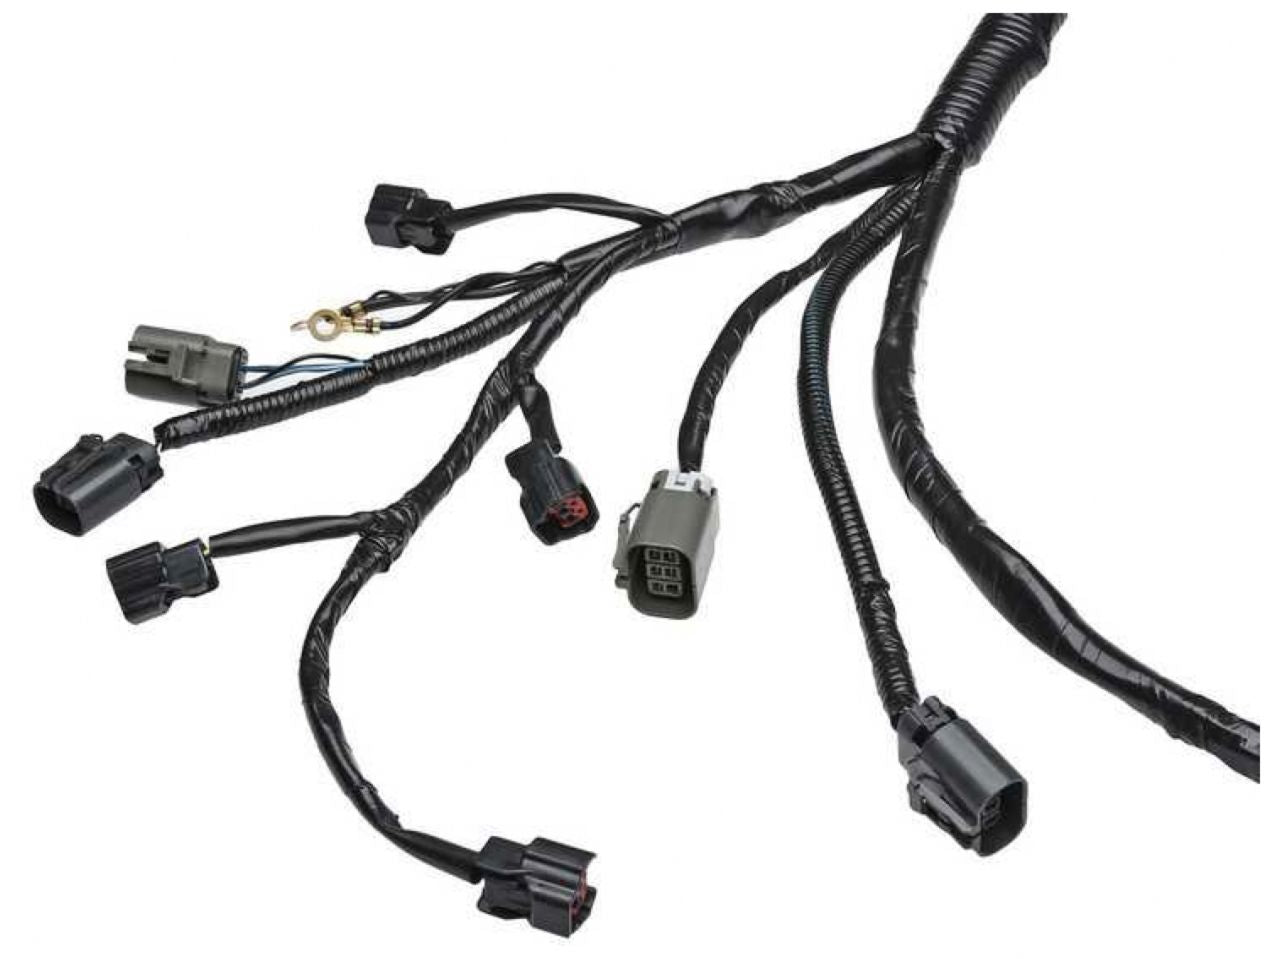 Wiring Specialties S13 SR20DET Main Engine Harness for S13 240sx - OEM SERIES